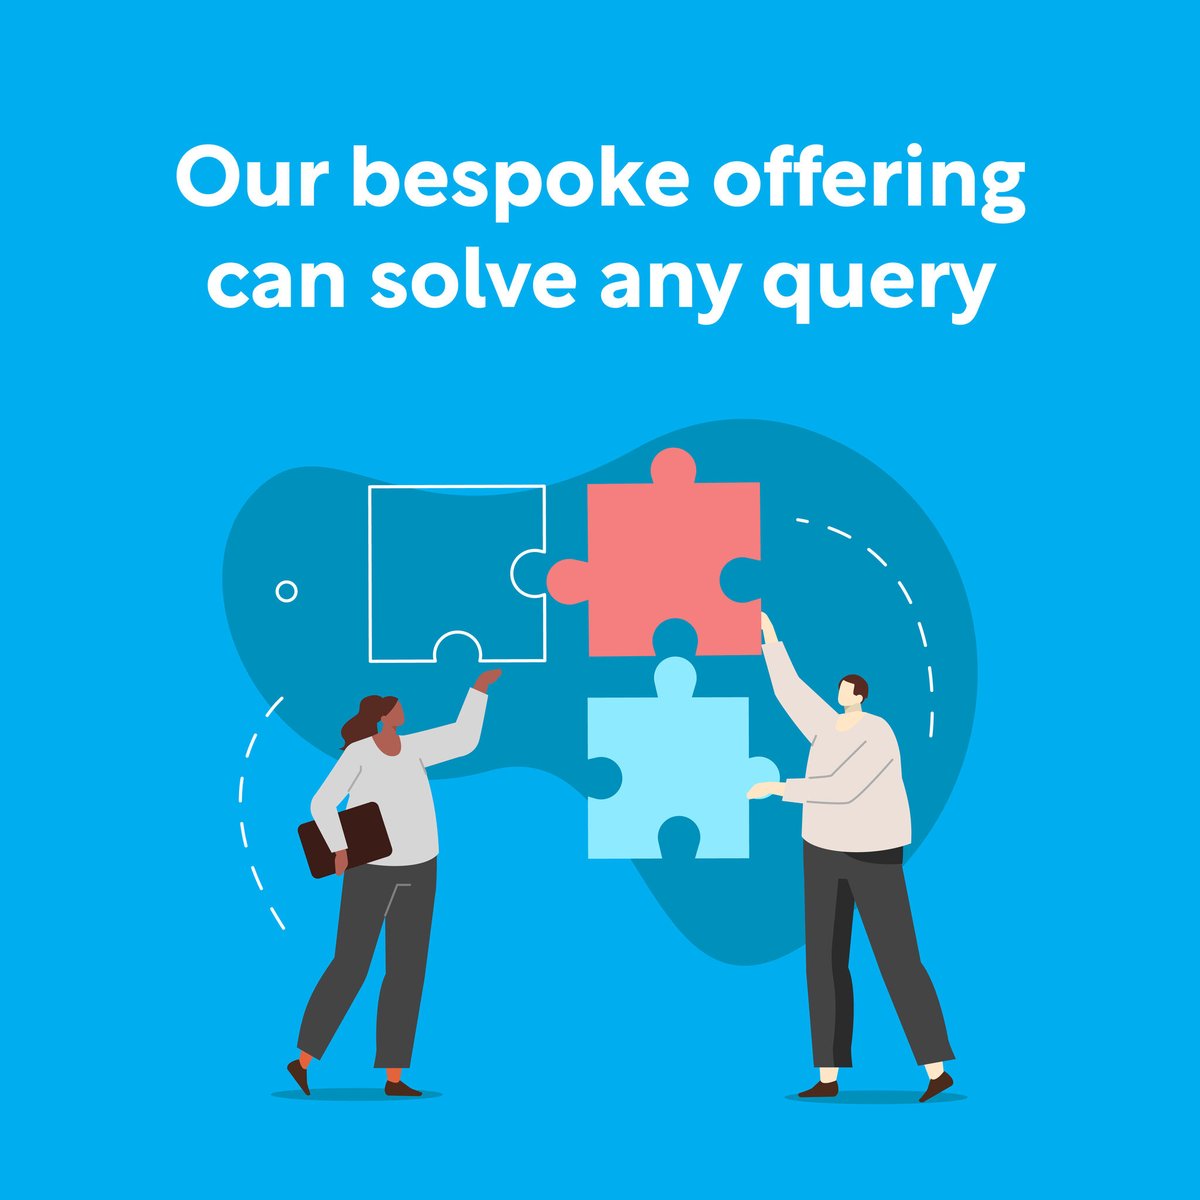 Learn how our bespoke offering can give you custom choices and tailored solutions. Get a quote: bit.ly/4cw4eJa